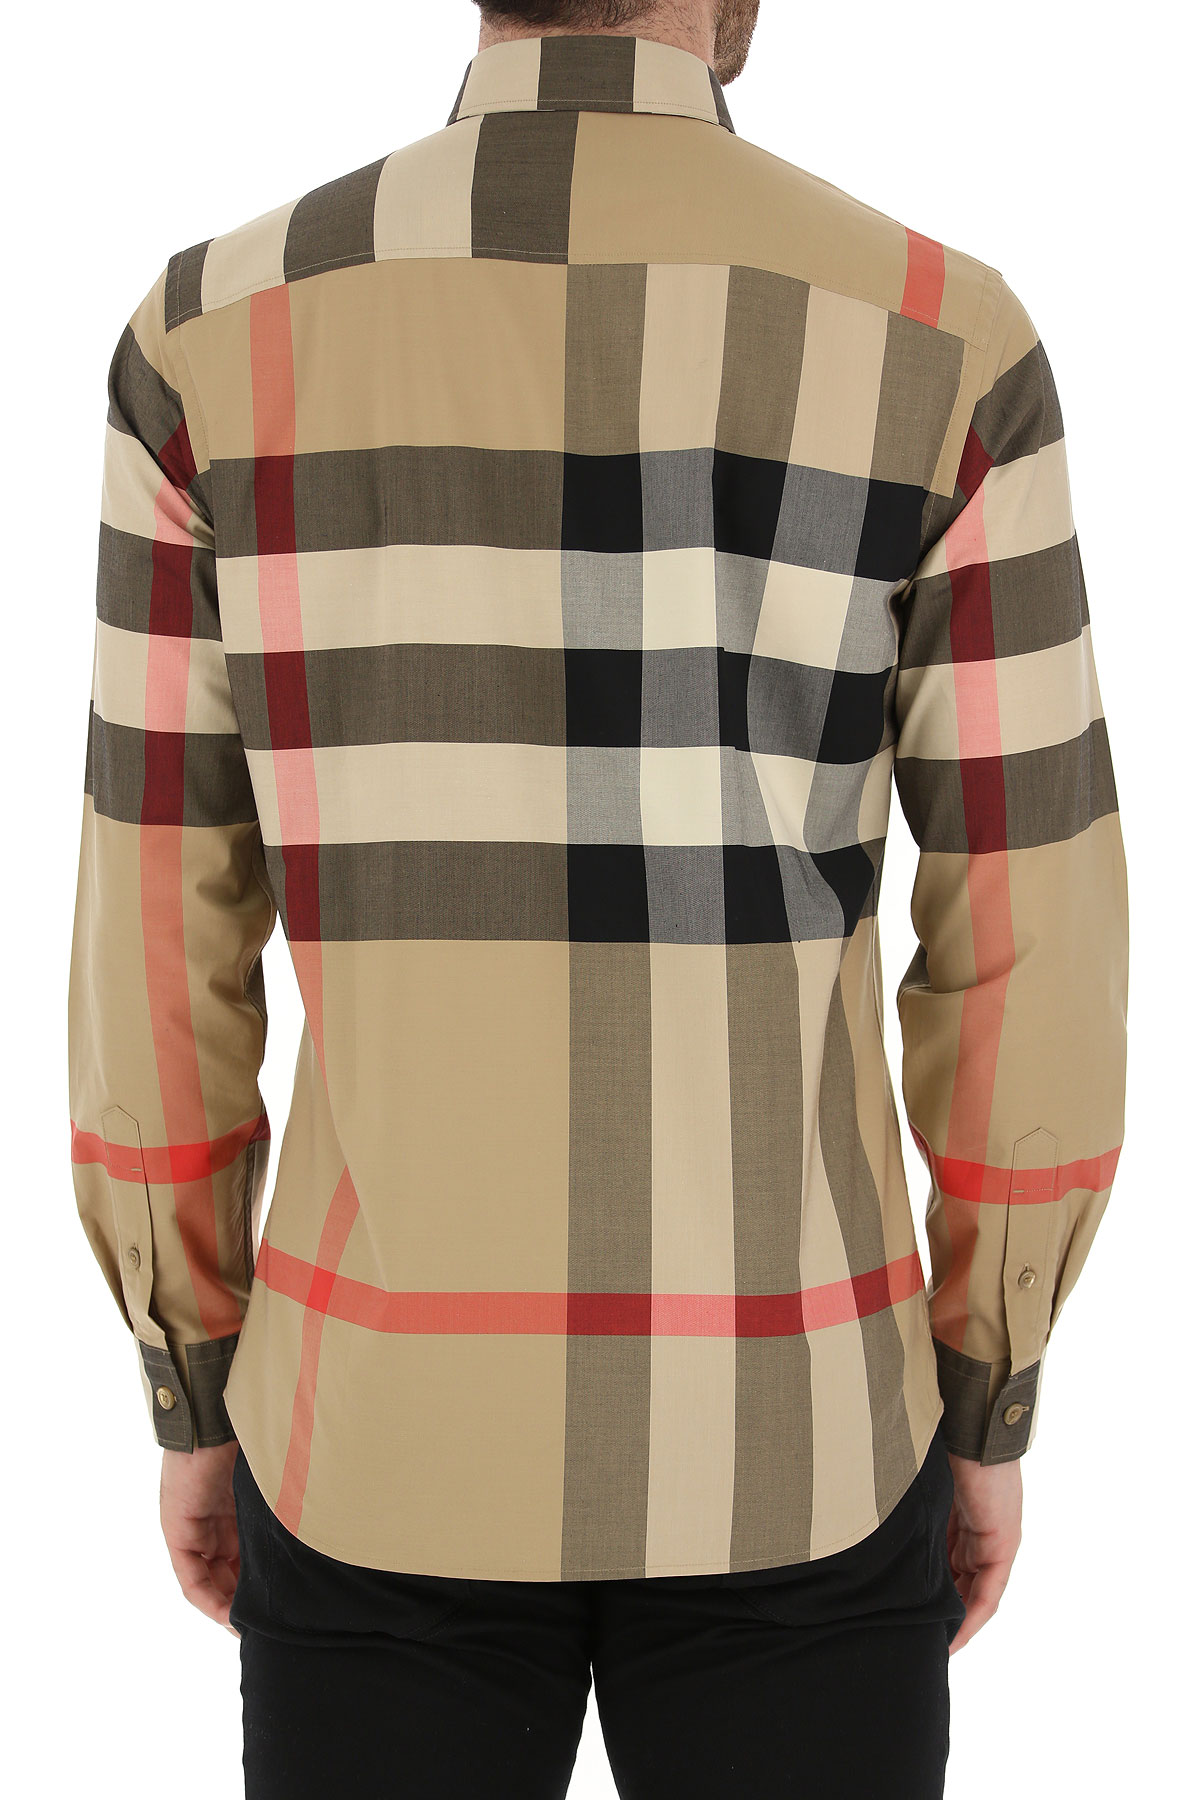 Mens Clothing Burberry, Style code: 8010213-a7028-